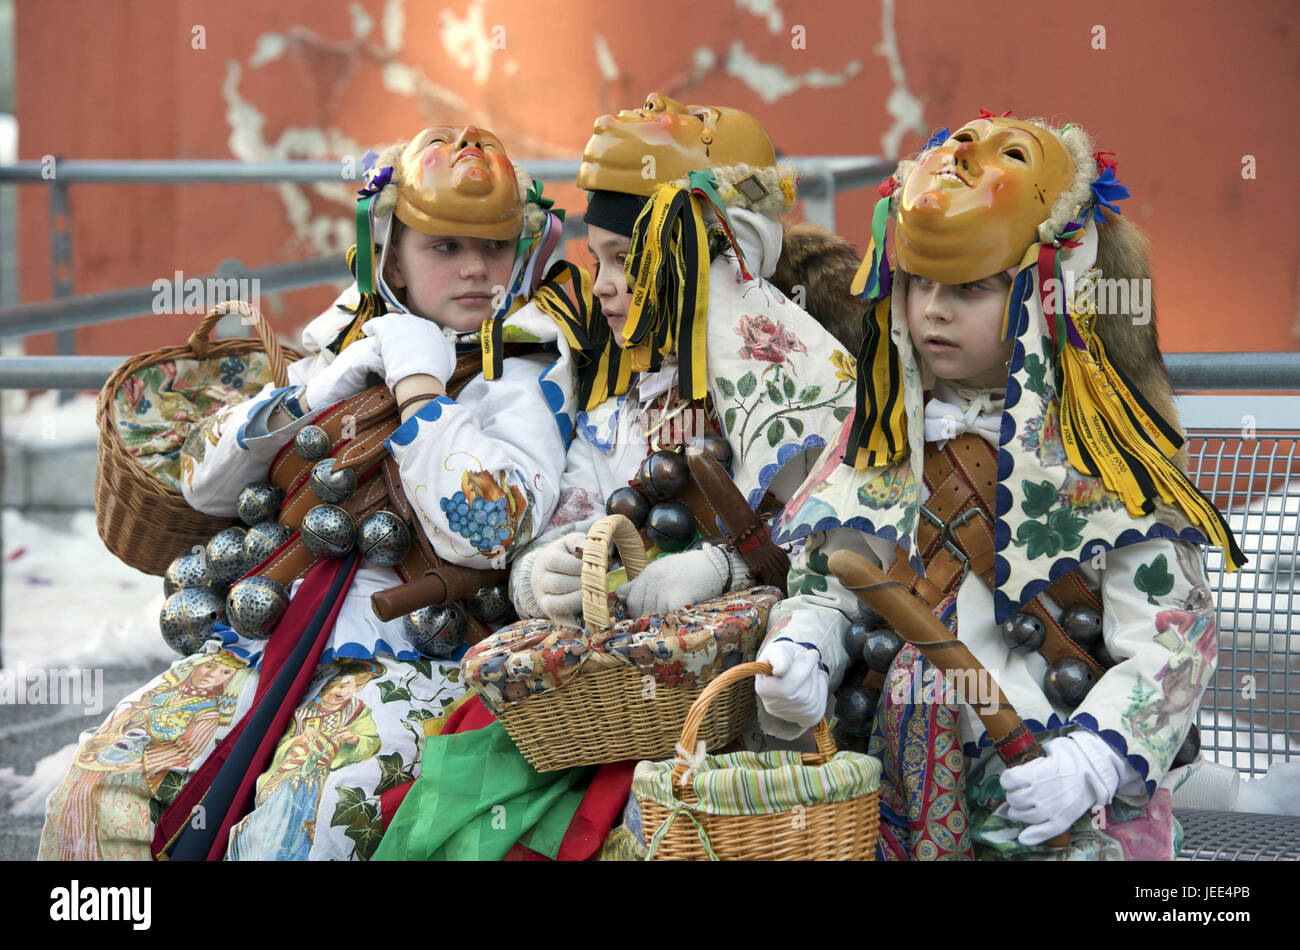 Germania, Baden-Württemberg, Rottweil, Rottweiler Fool's guild, tre bambini in costume fare pausa, Foto Stock